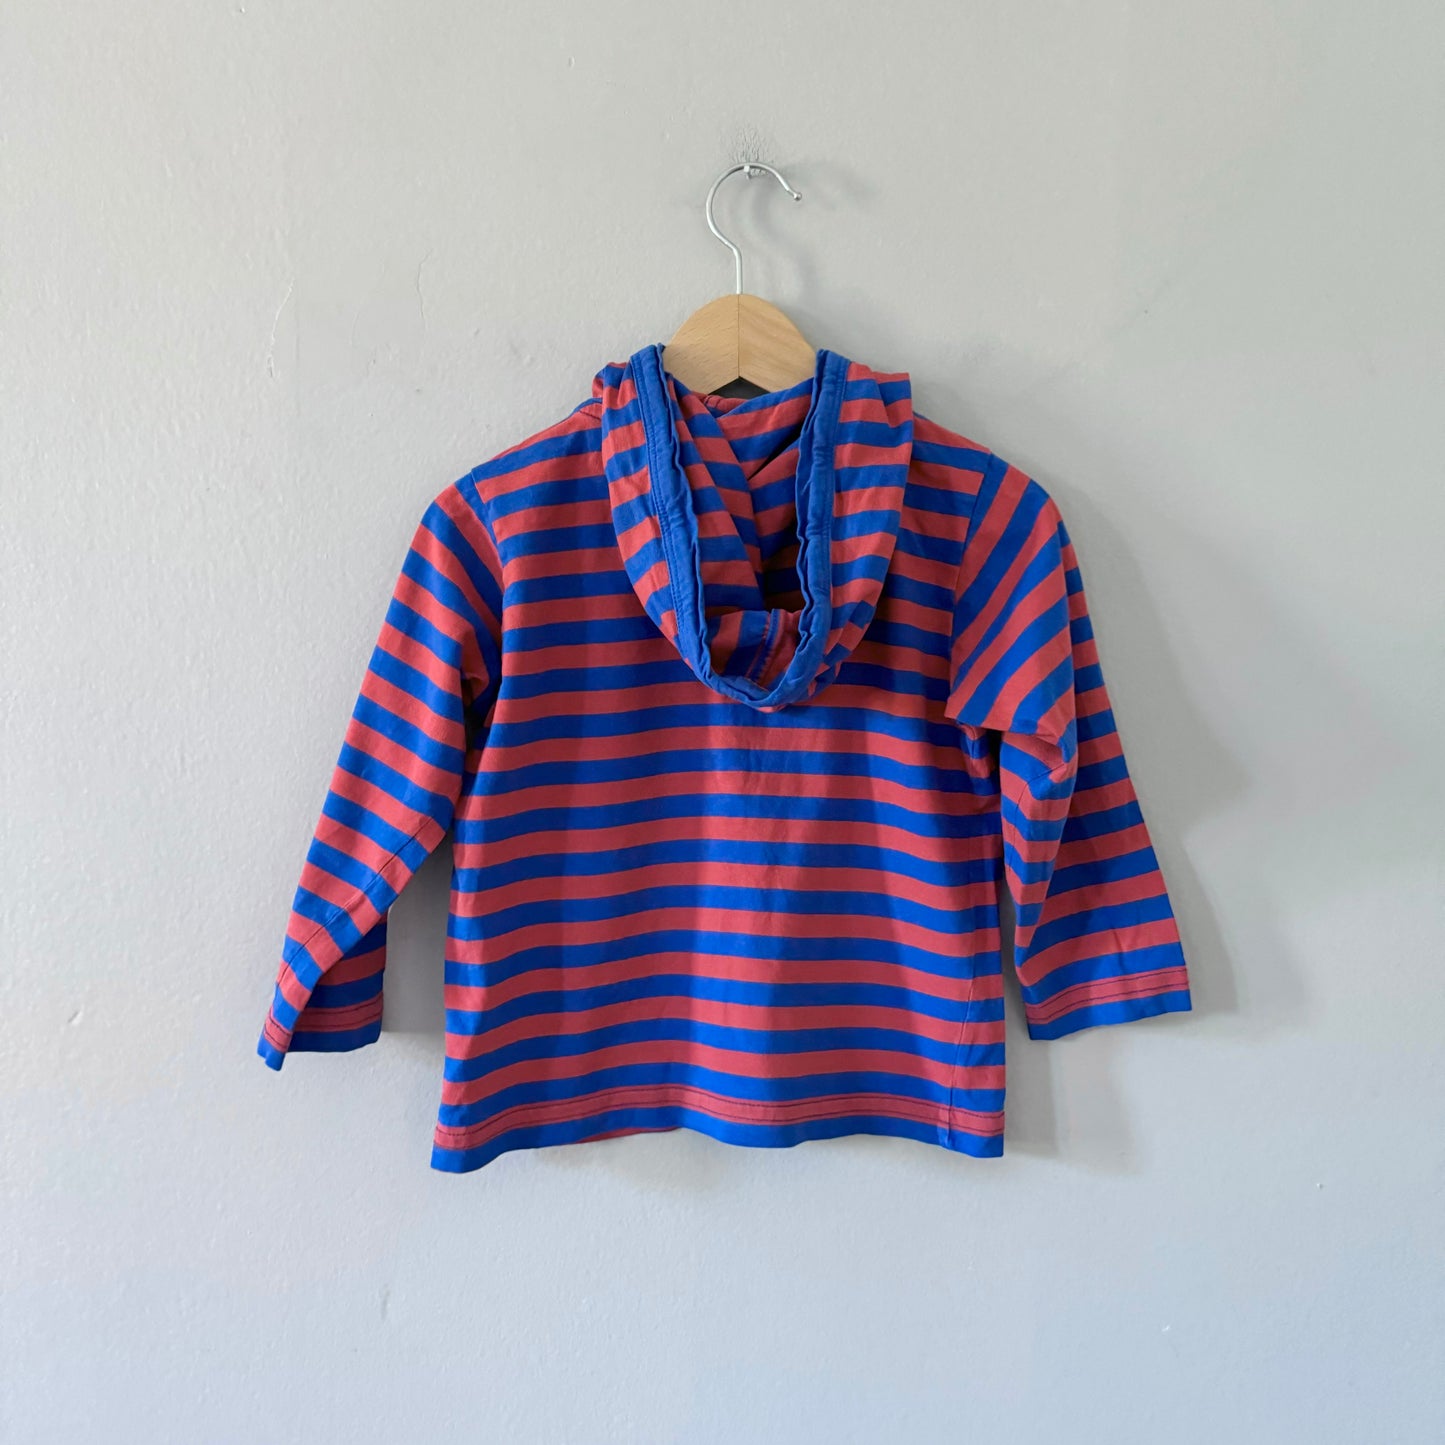 Lacoste / Striped long sleeve top / 2Y